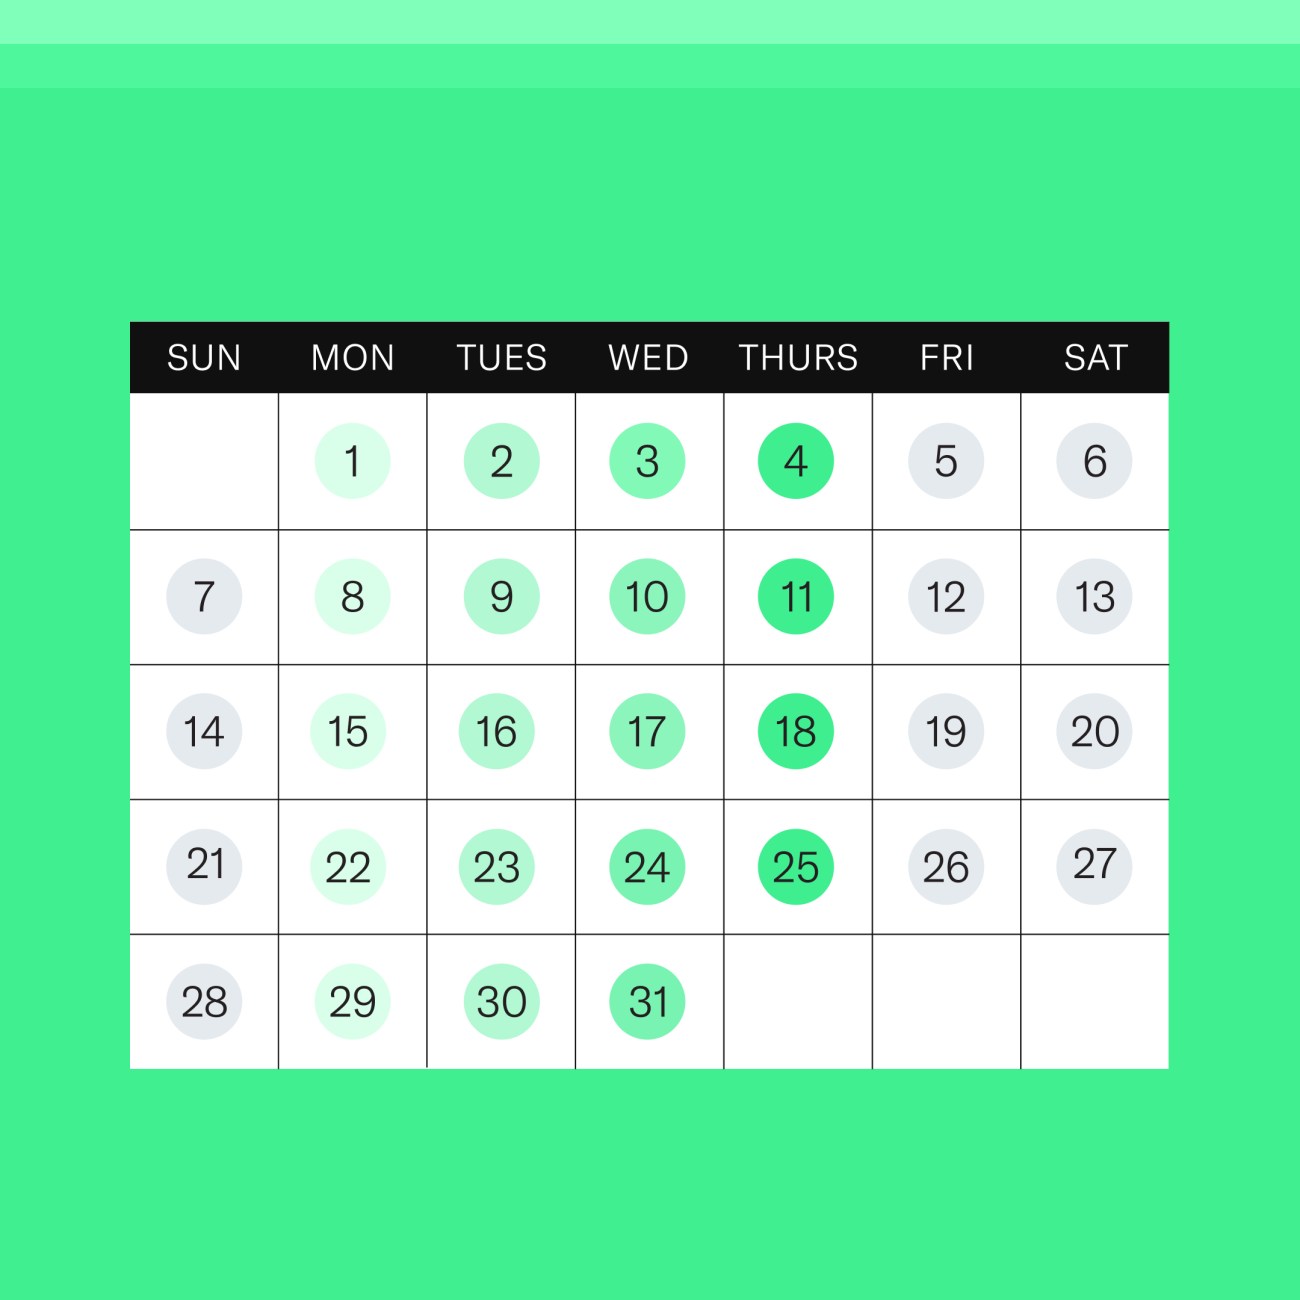 Tonal members who aim to work out 4+ days per week are the most consistent. 